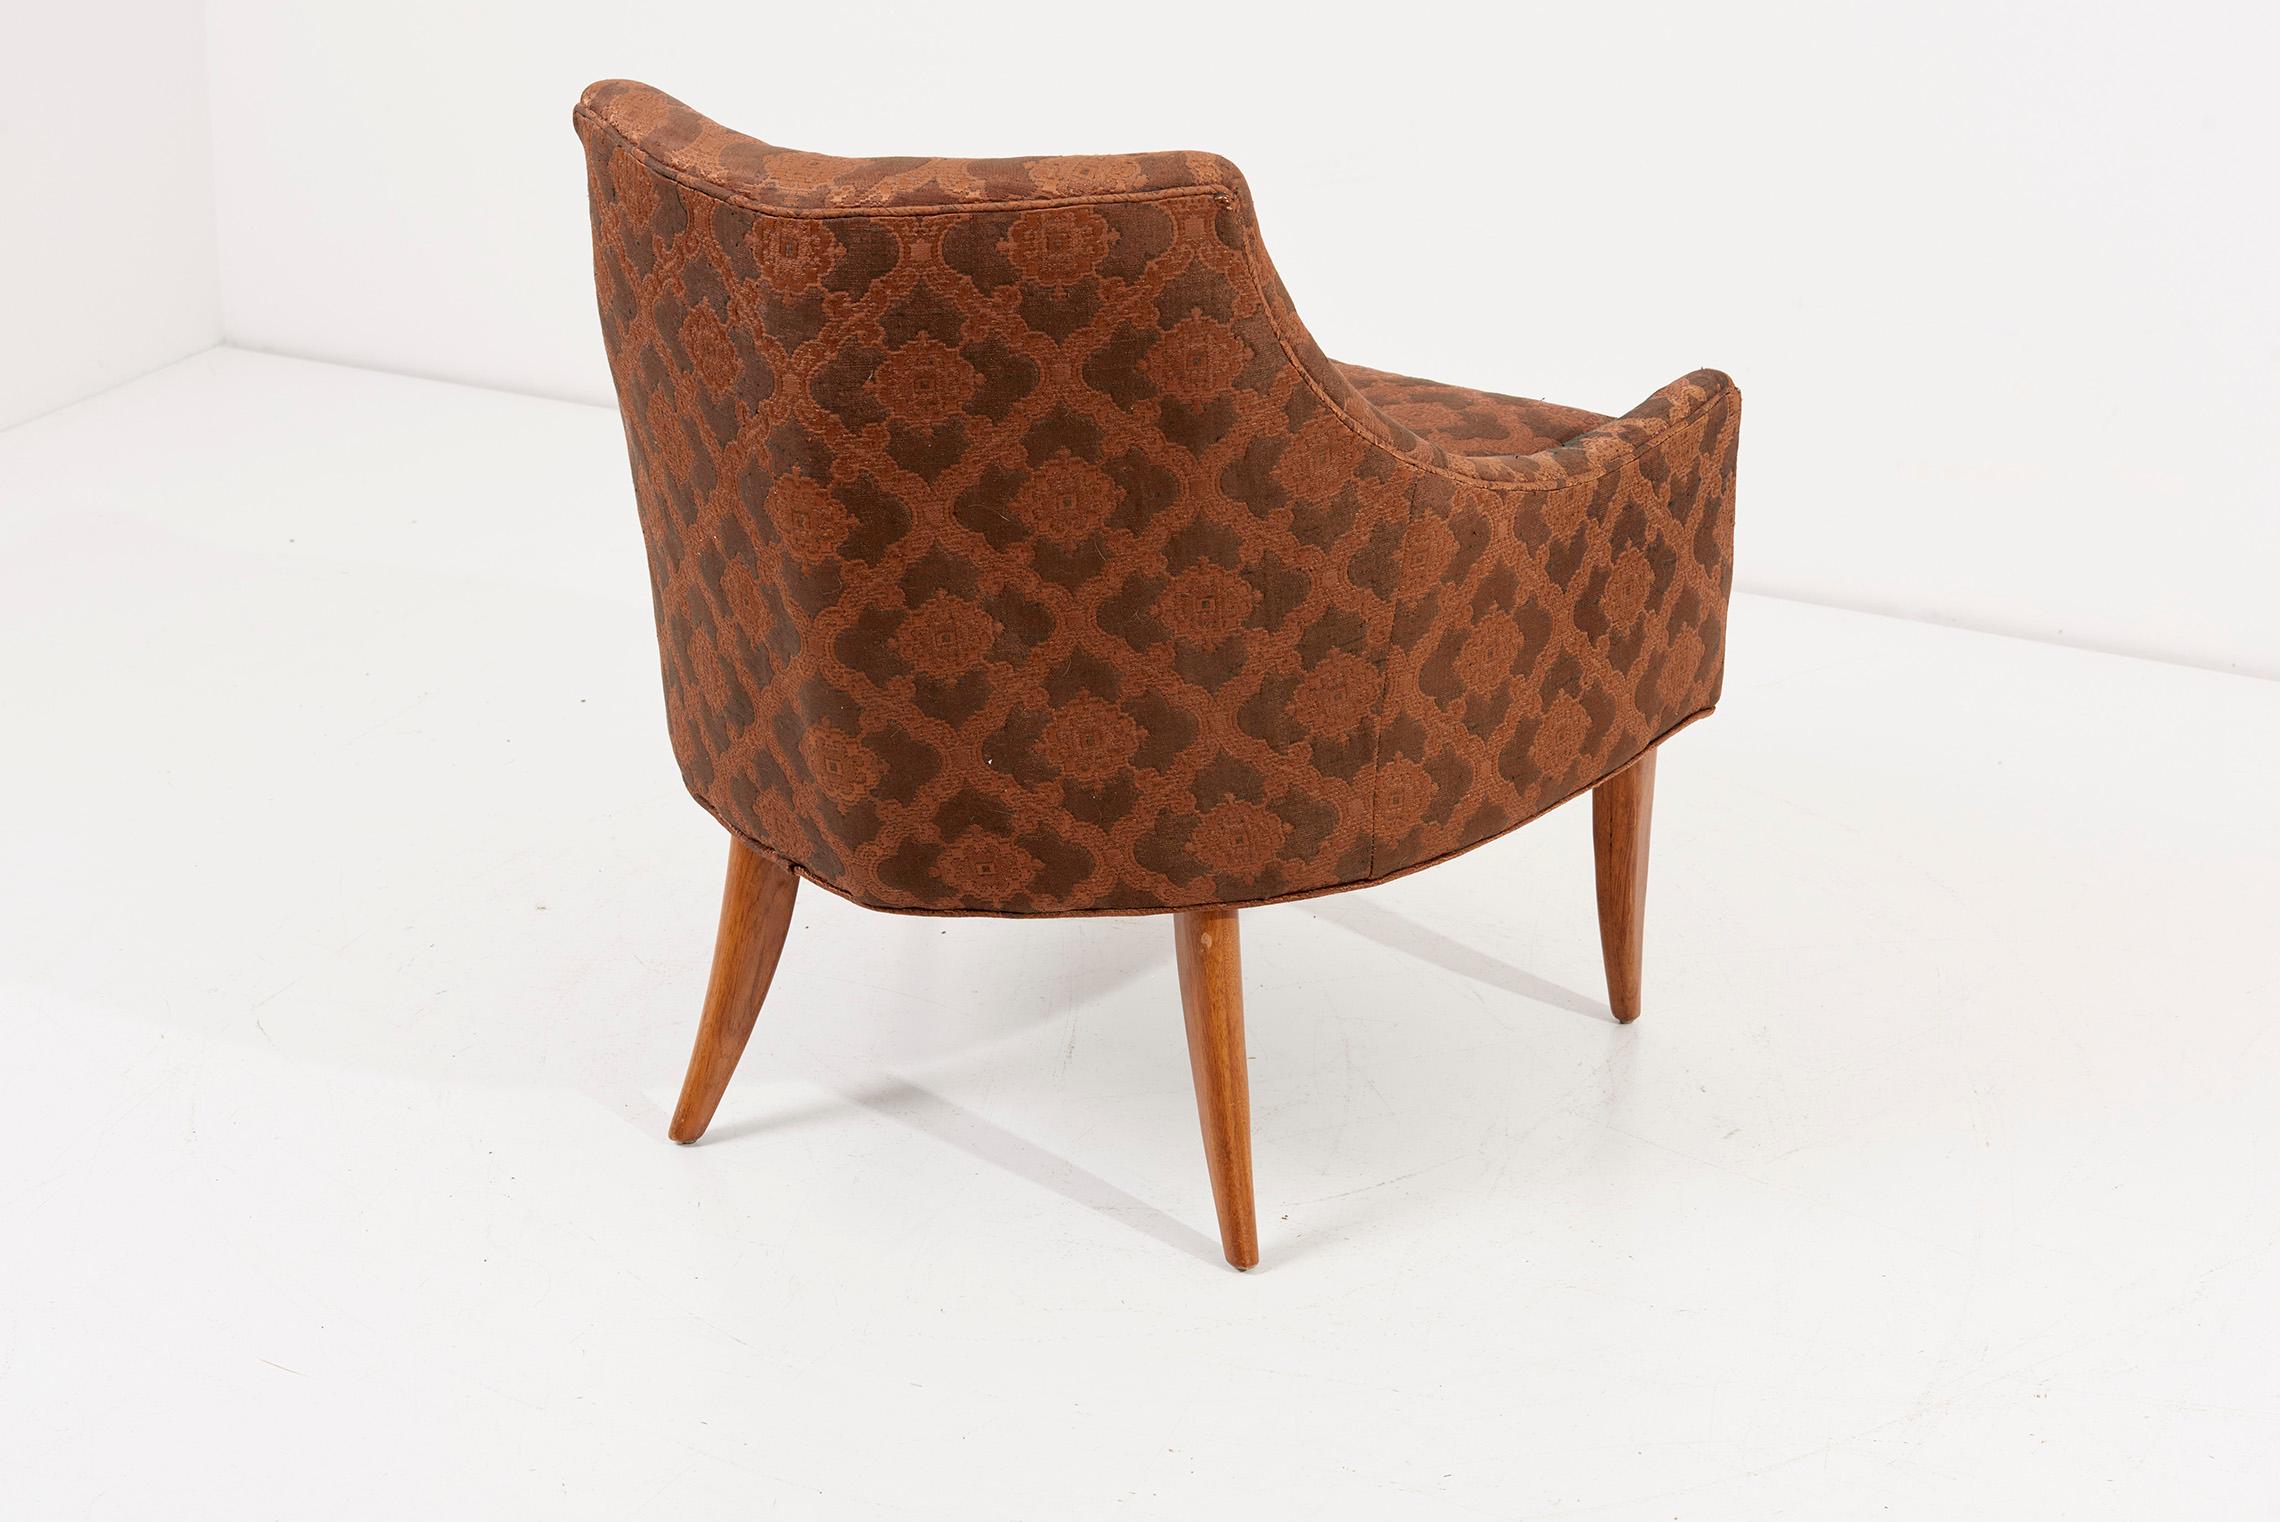 Upholstery Pair of Kroehler Avant Lounge Chairs on Original Condition, USA, 1960s For Sale